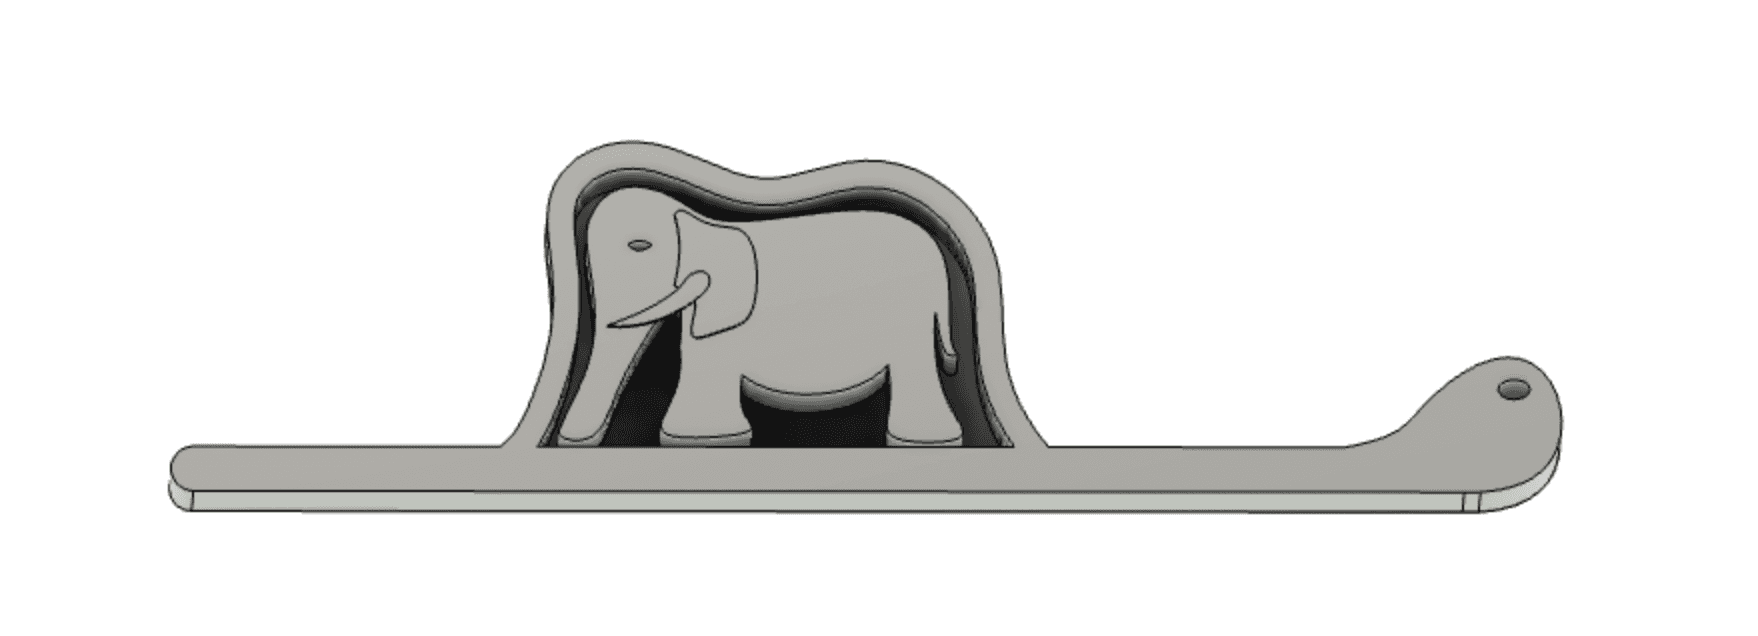 Elephant and Snake from The Little Prince "Hat" 3d model